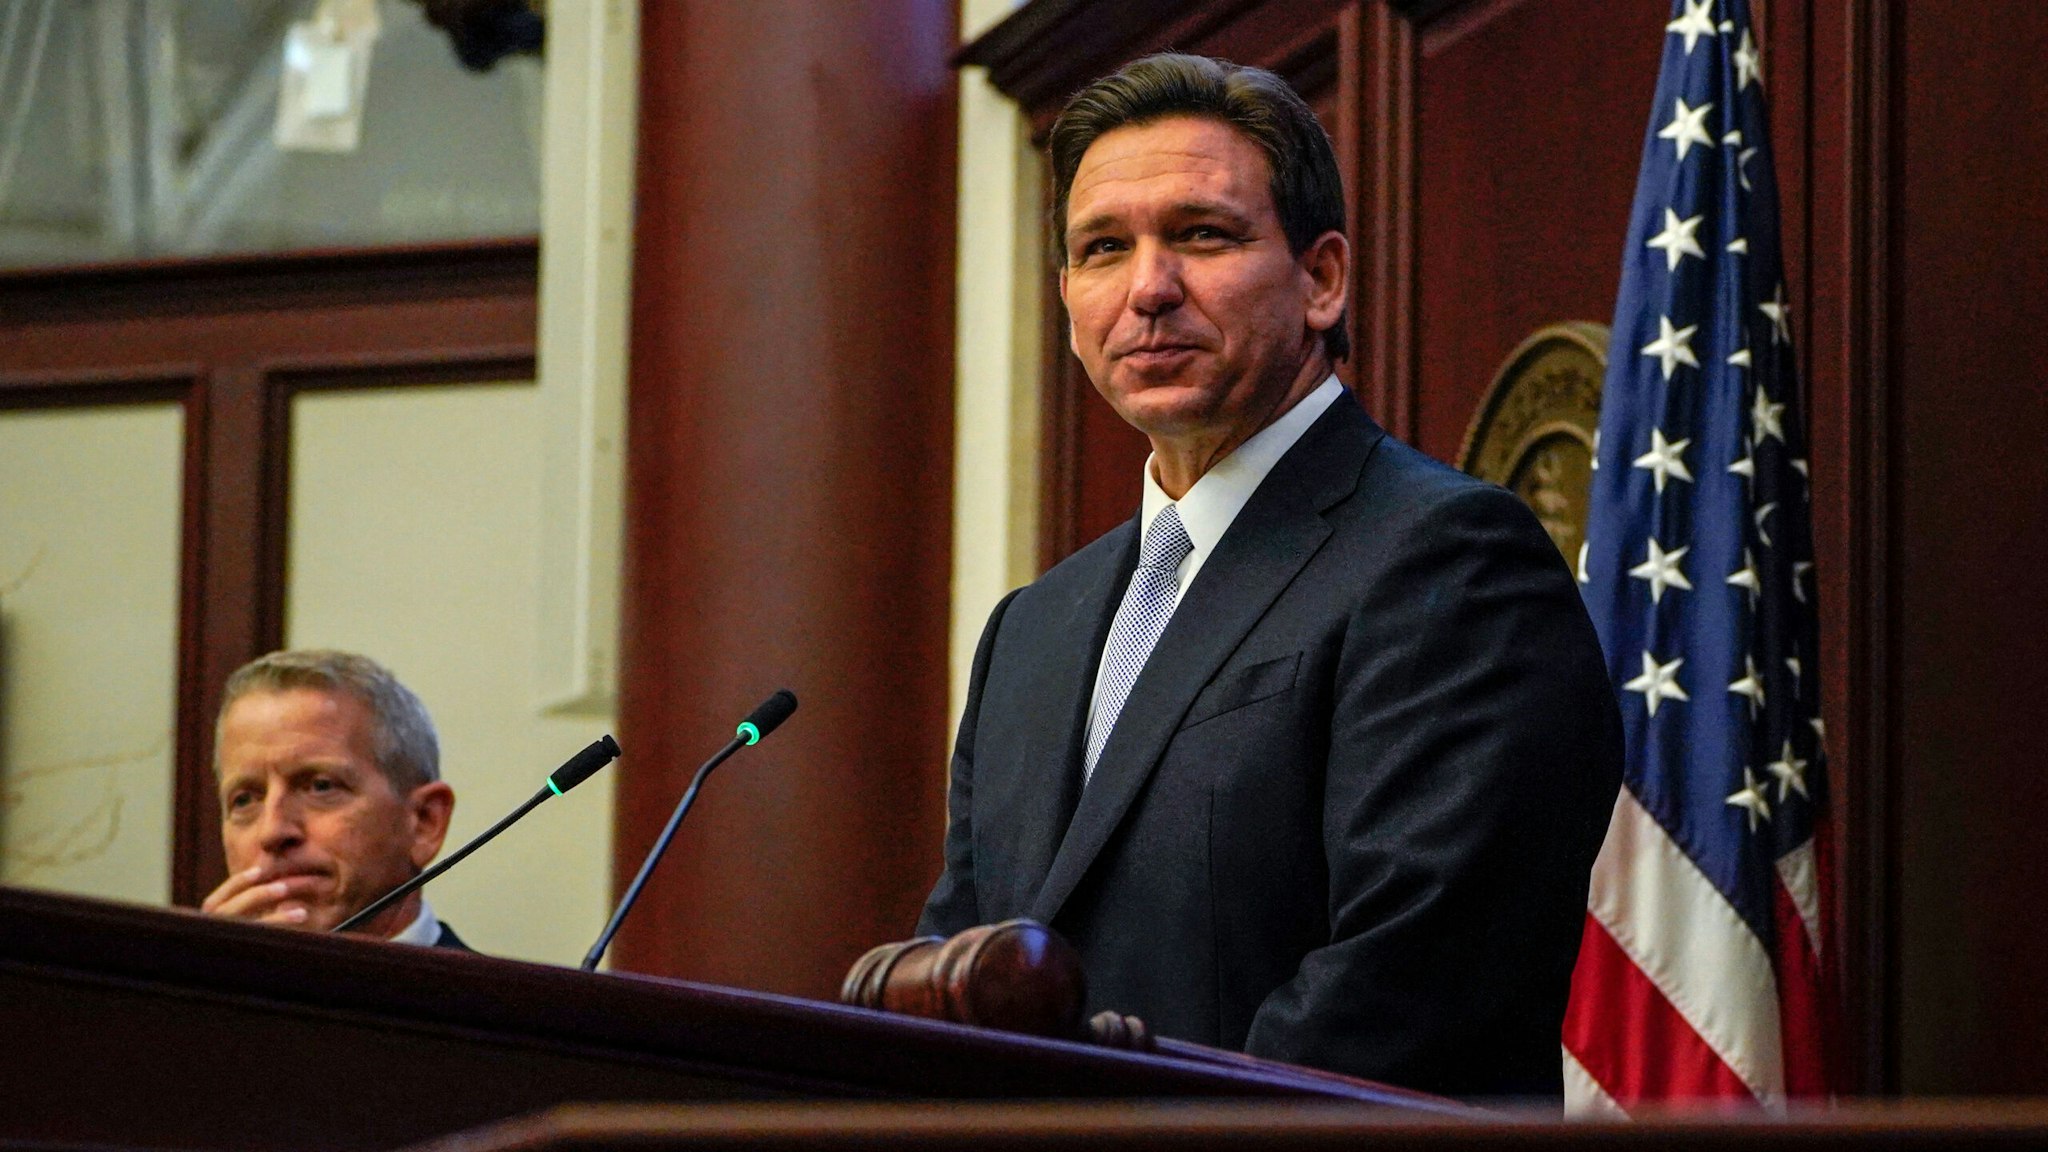 Florida Governor Ron DeSantis delivers the "State of the State" address at the Florida State Capitol in Tallahassee, Florida, on March 7, 2023. - DeSantis positioned himself Tuesday as the leading Republican alternative to White House candidate Donald Trump, launching a legislative session that offers red meat for the ex-president's base as the party's rising star weighs his own 2024 campaign.